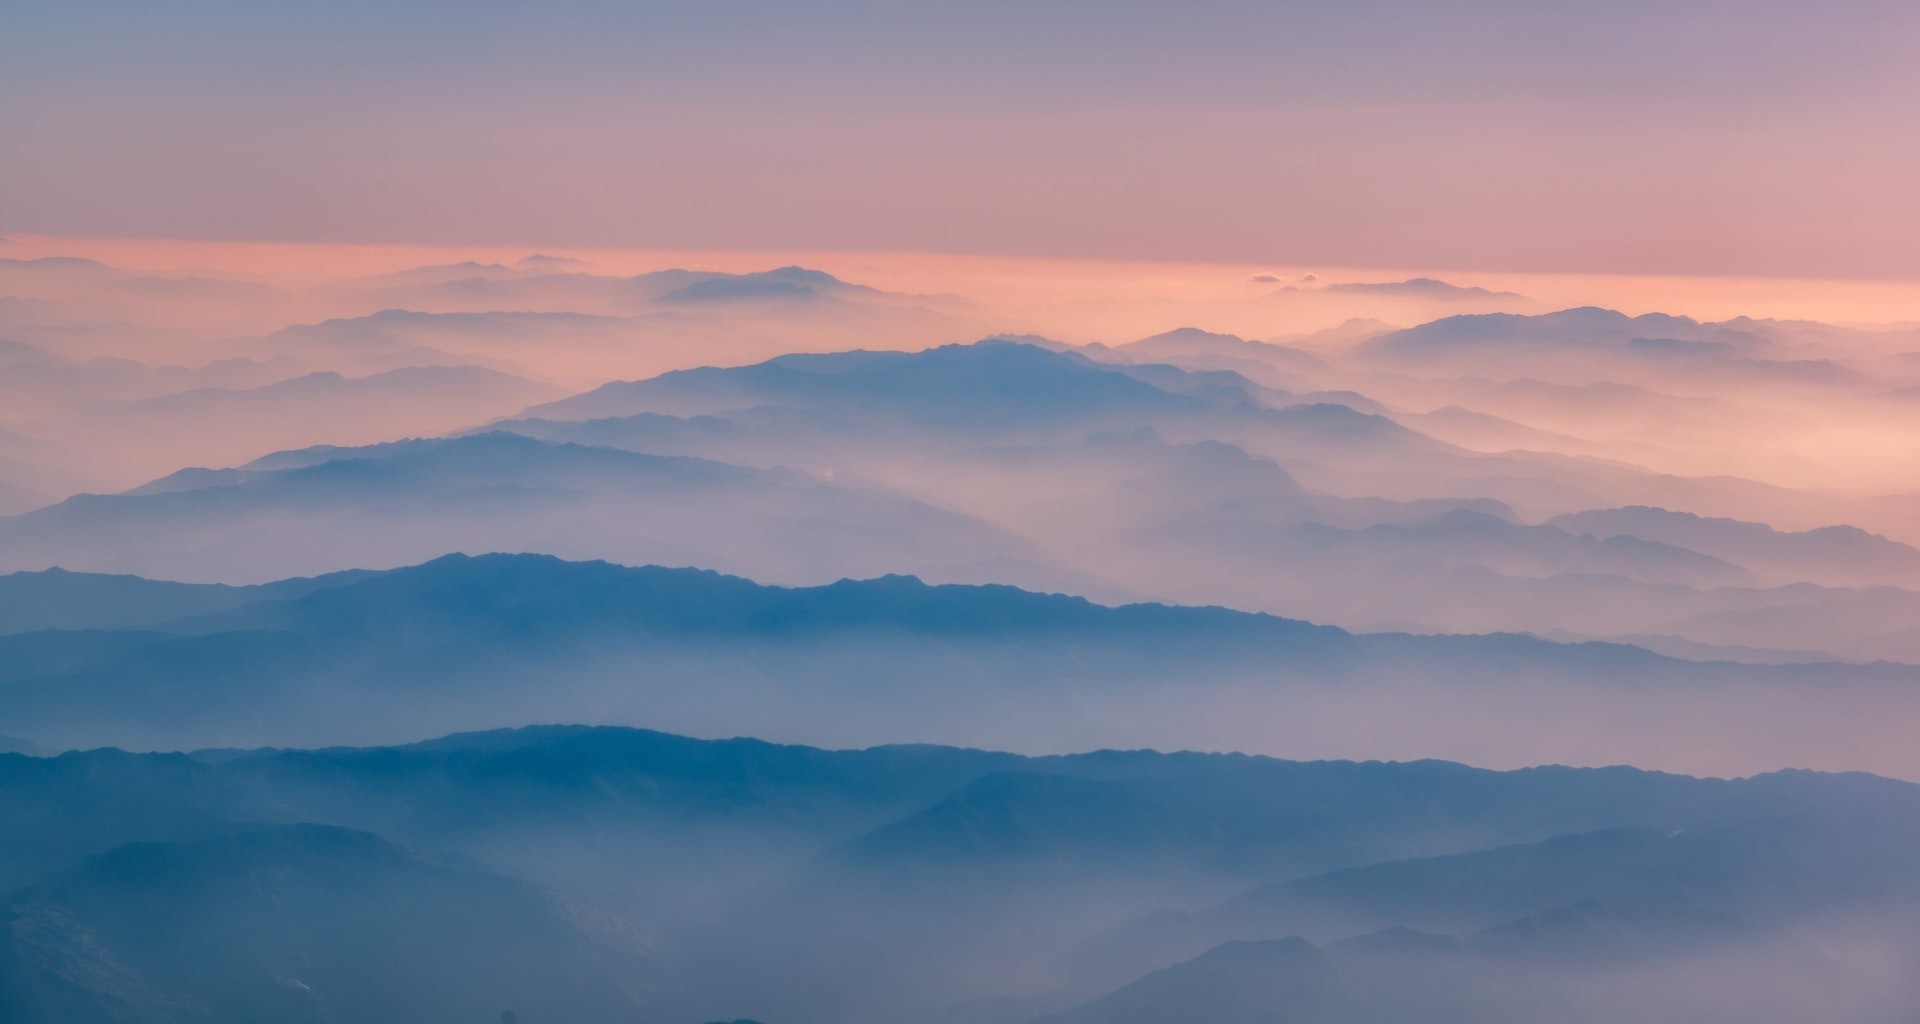 An image of a foggy mountain scenery